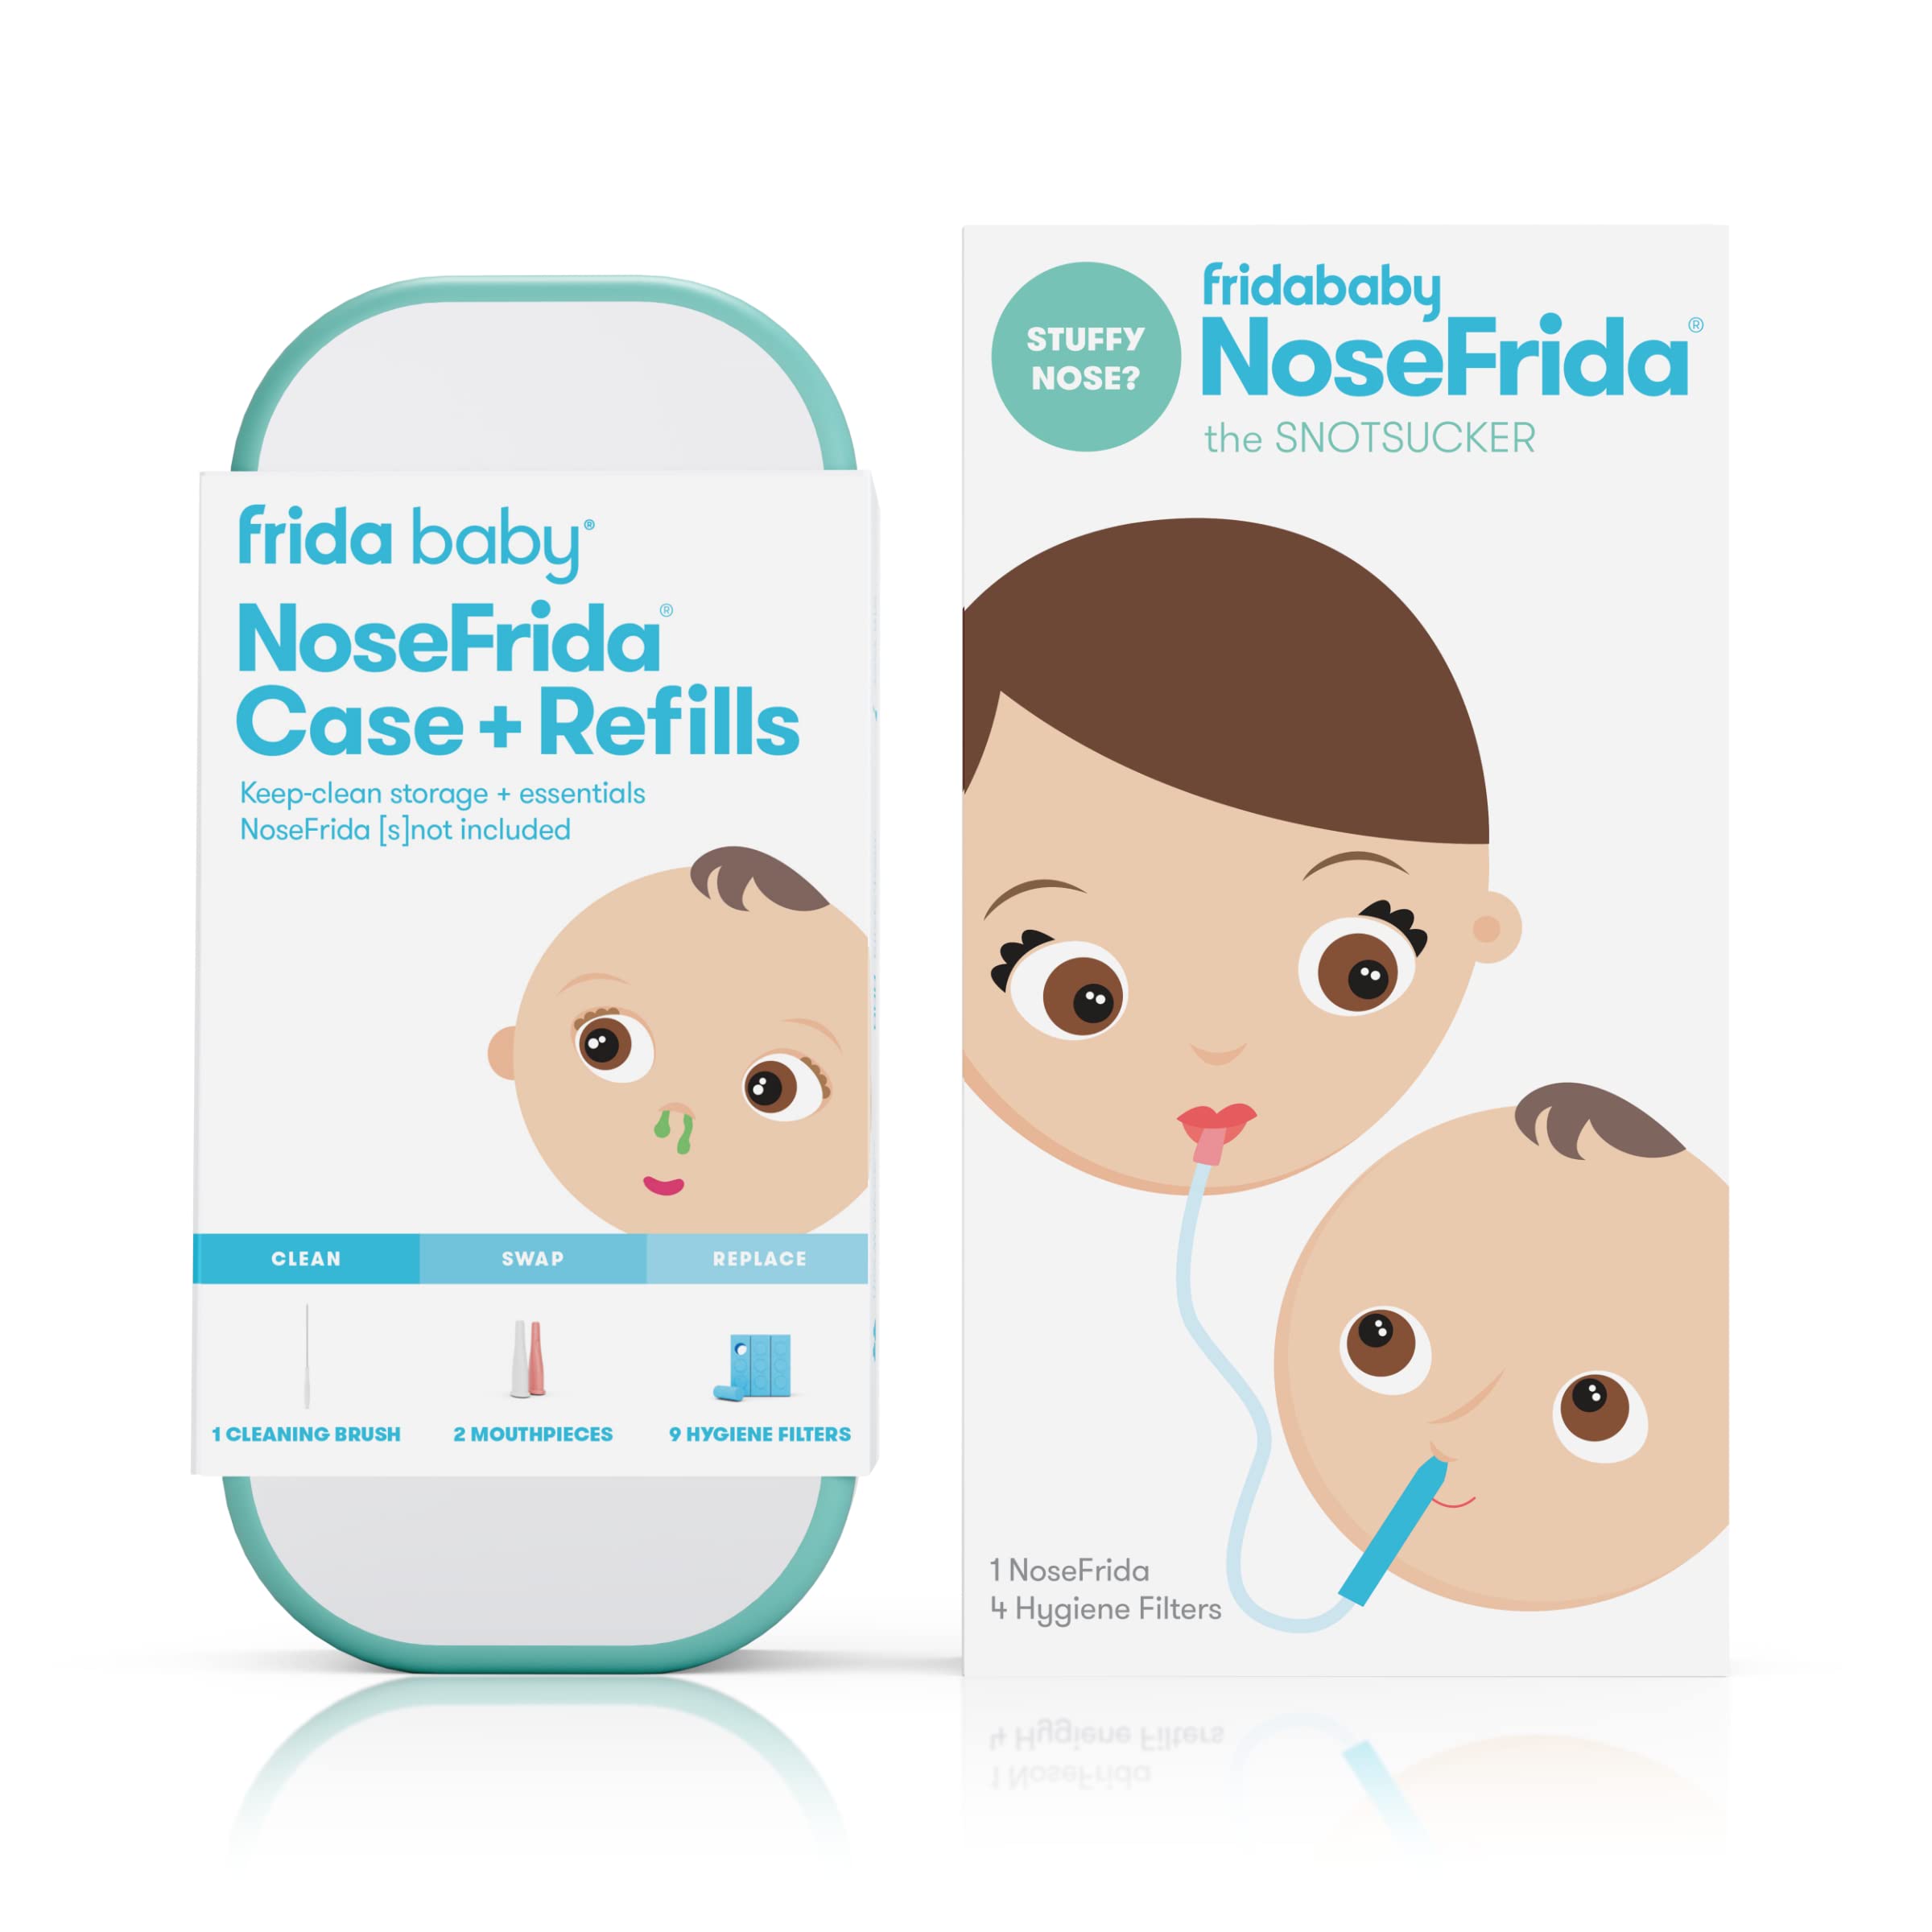 Bundle of Frida Baby Baby Nasal Aspirator NoseFrida The Snotsucker + Frida Baby NoseFrida Case + Refills | Cleaning and Storage for Doctor-Recommended NoseFrida The Snotsucker Nasal Aspirator